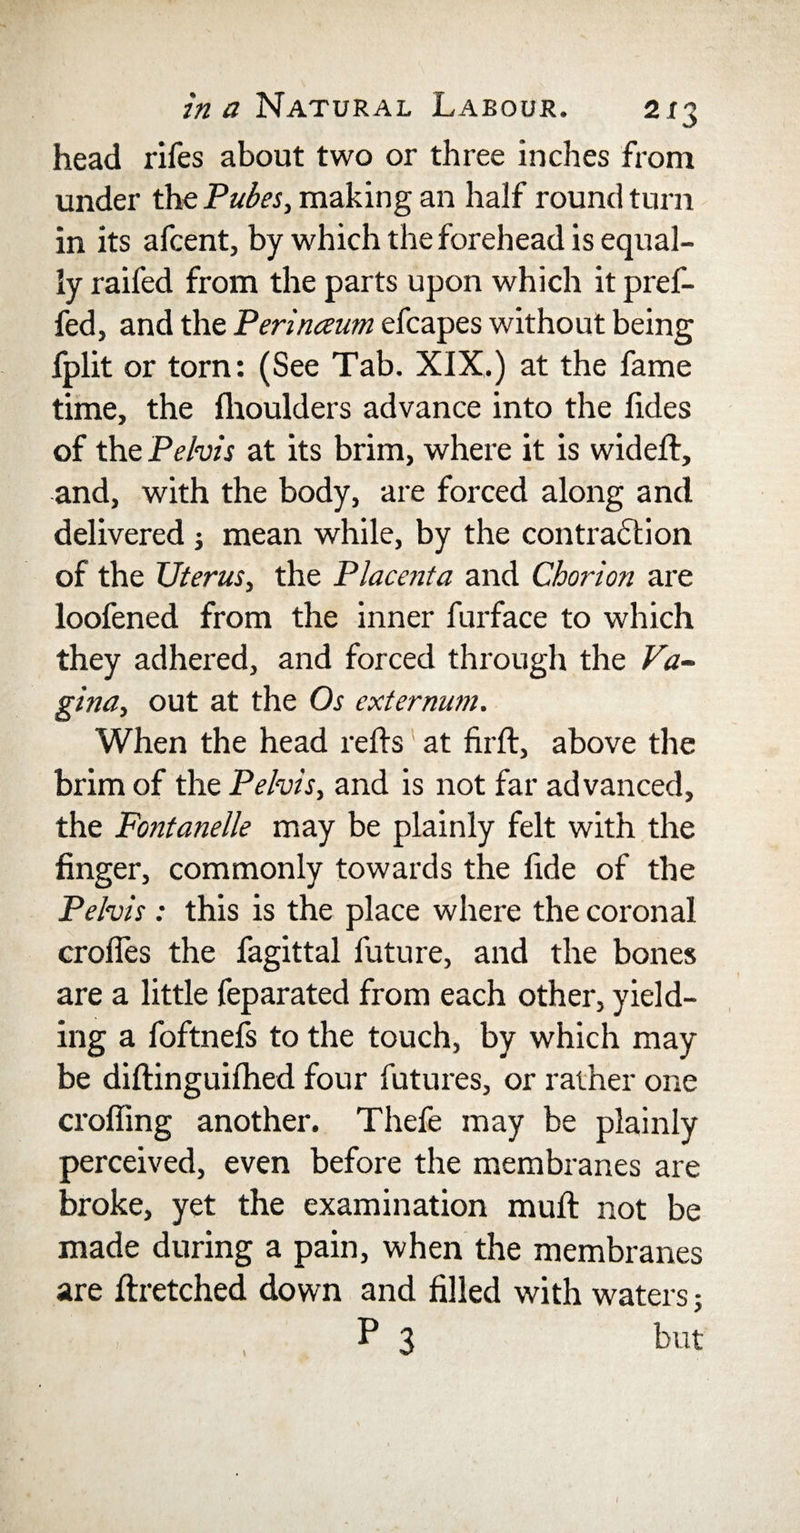 head rifes about two or three inches from under thq Pubes, making an half round turn in its afcent, by which the forehead is equal¬ ly raifed from the parts upon which it pref- fed, and the Perinceum efcapes without being fplit or torn: (See Tab. XIX.) at the fame time, the fhoulders advance into the fides of the Pelvis at its brim, where it is wideft, and, with the body, are forced along and delivered j mean while, by the contraction of the Uterus, the Placenta and Chorion are loofened from the inner furface to which they adhered, and forced through the Va¬ gina, out at the Os externum. When the head reds; at firft, above the brim of the Pelvis, and is not far advanced, the Fontanelle may be plainly felt with the finger, commonly towards the fide of the Pelvis: this is the place where the coronal erodes the fagittal future, and the bones are a little feparated from each other, yield¬ ing a foftnefs to the touch, by which may be diftinguifhed four futures, or rather one croffing another. Thefe may be plainly perceived, even before the membranes are broke, yet the examination mud: not be made during a pain, when the membranes are ftretched down and filled with waters 5 P 3 but (